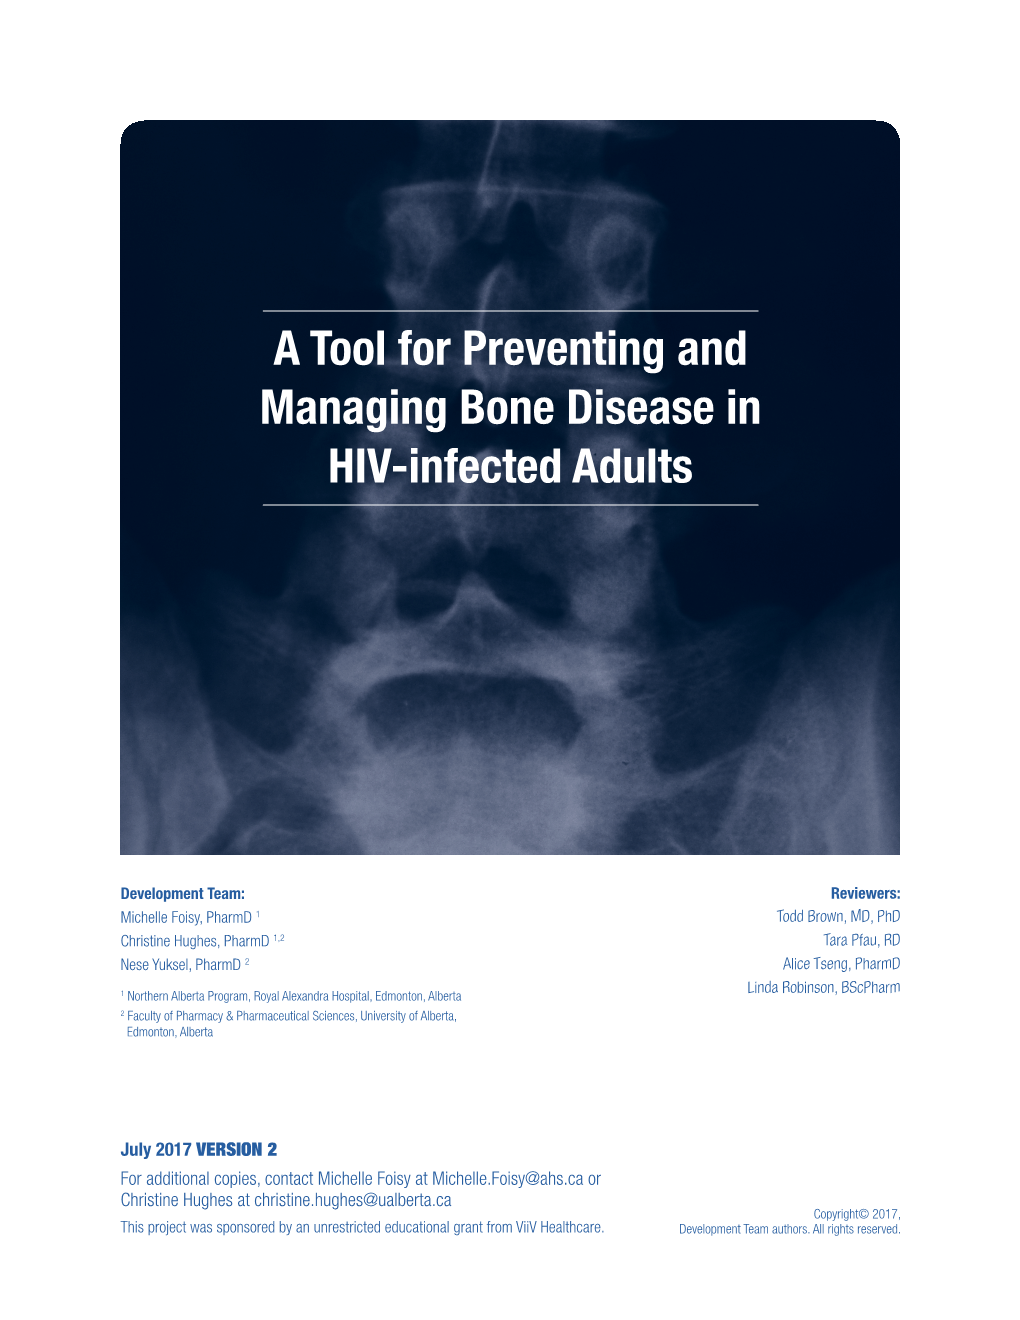 A Tool for Preventing and Managing Bone Disease in HIV-Infected Adults